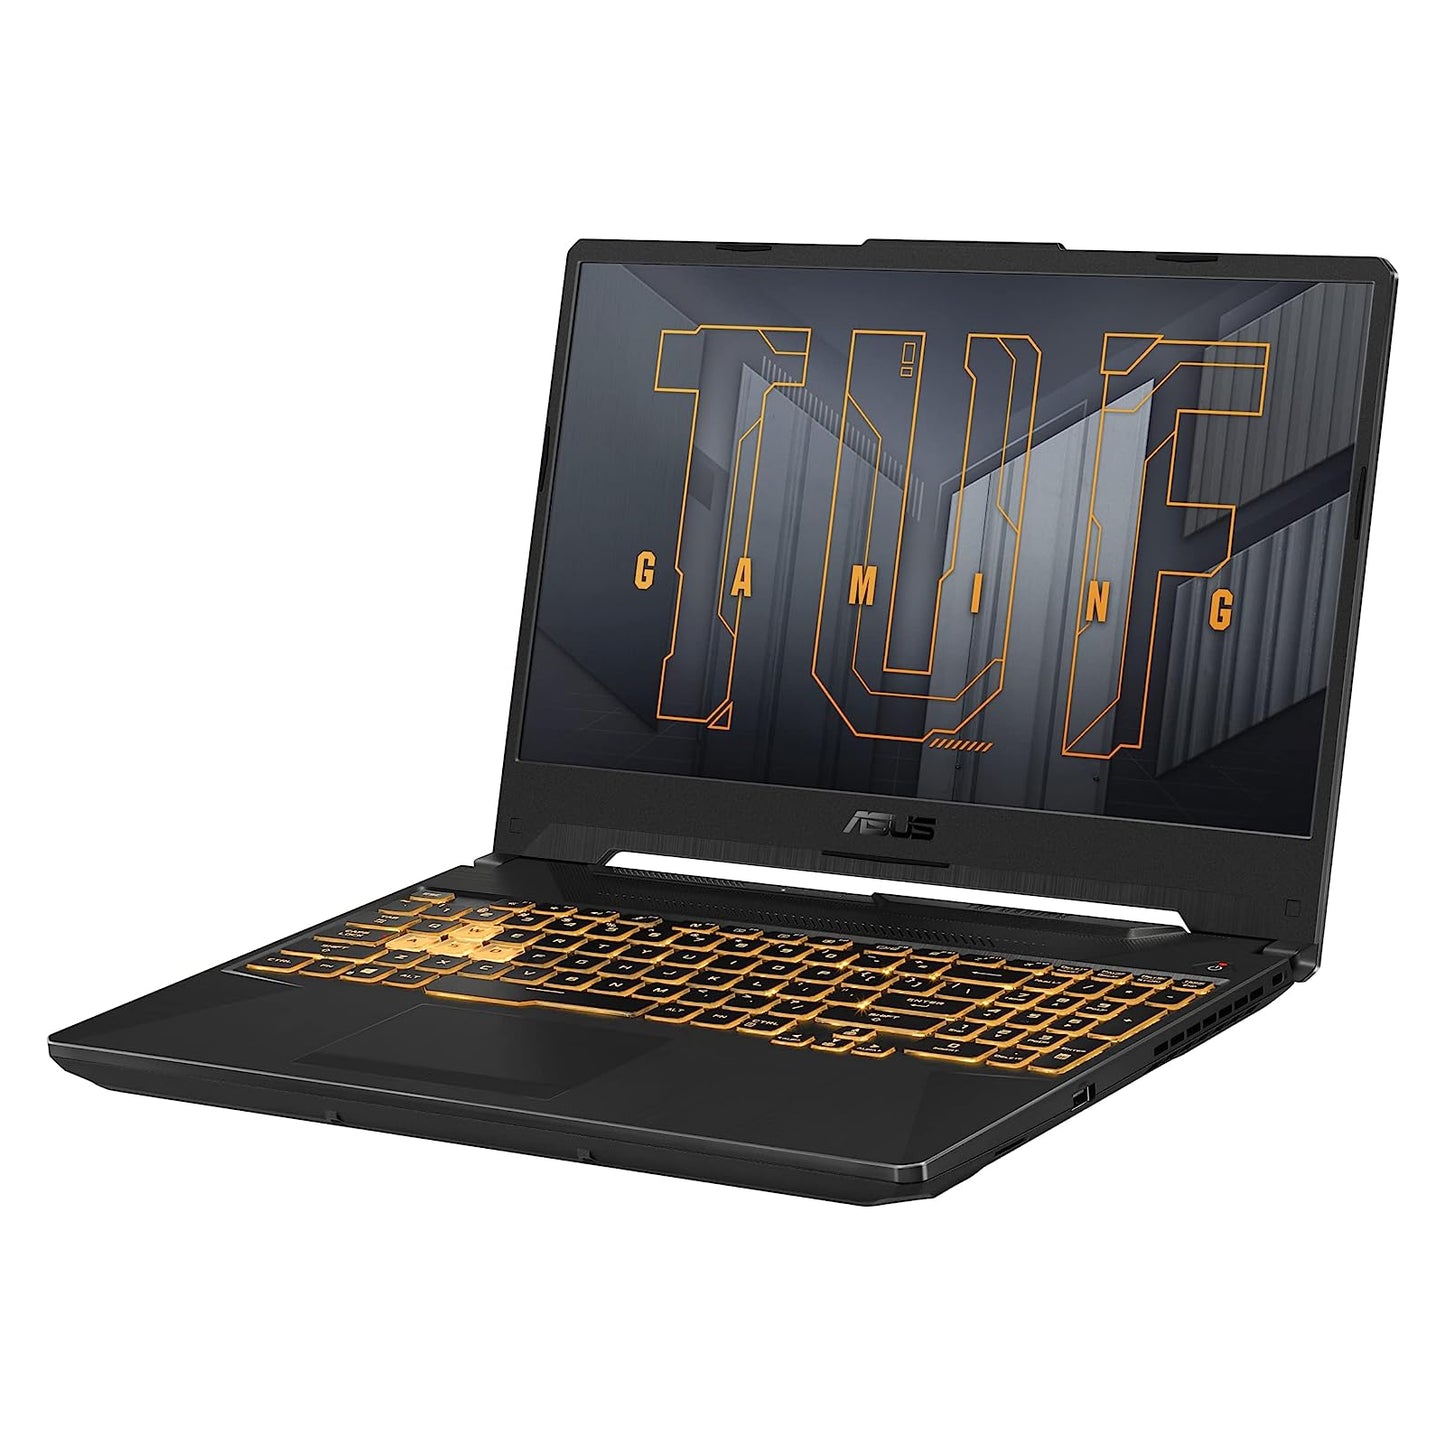 Asus Tuf F15 FX506HEB-IS73 Military Grade Core i7-11800h Rtx 3050 Ti 144Hz Gaming Laptop Offers (New OB)